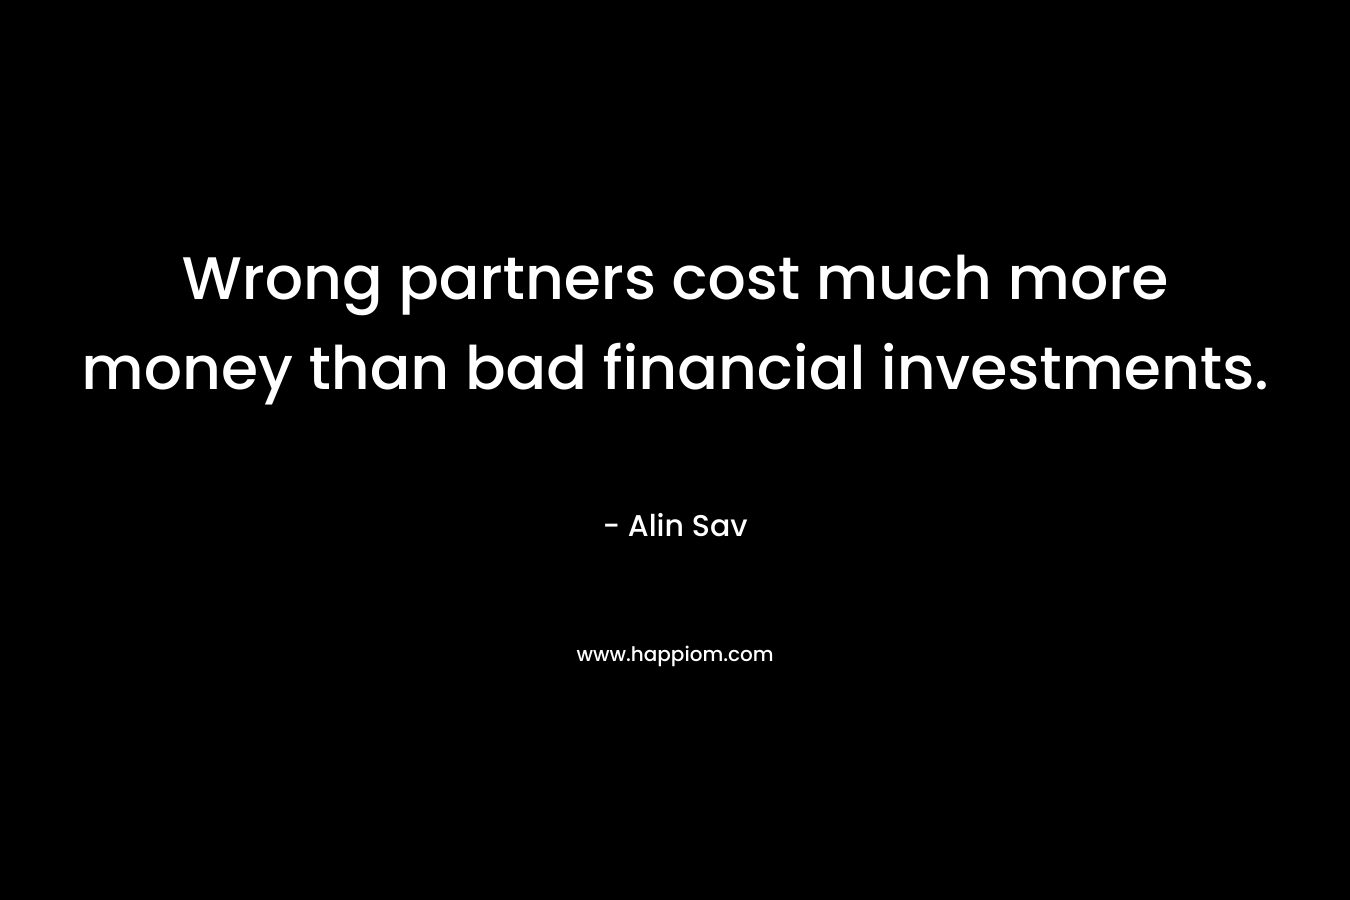 Wrong partners cost much more money than bad financial investments. – Alin Sav